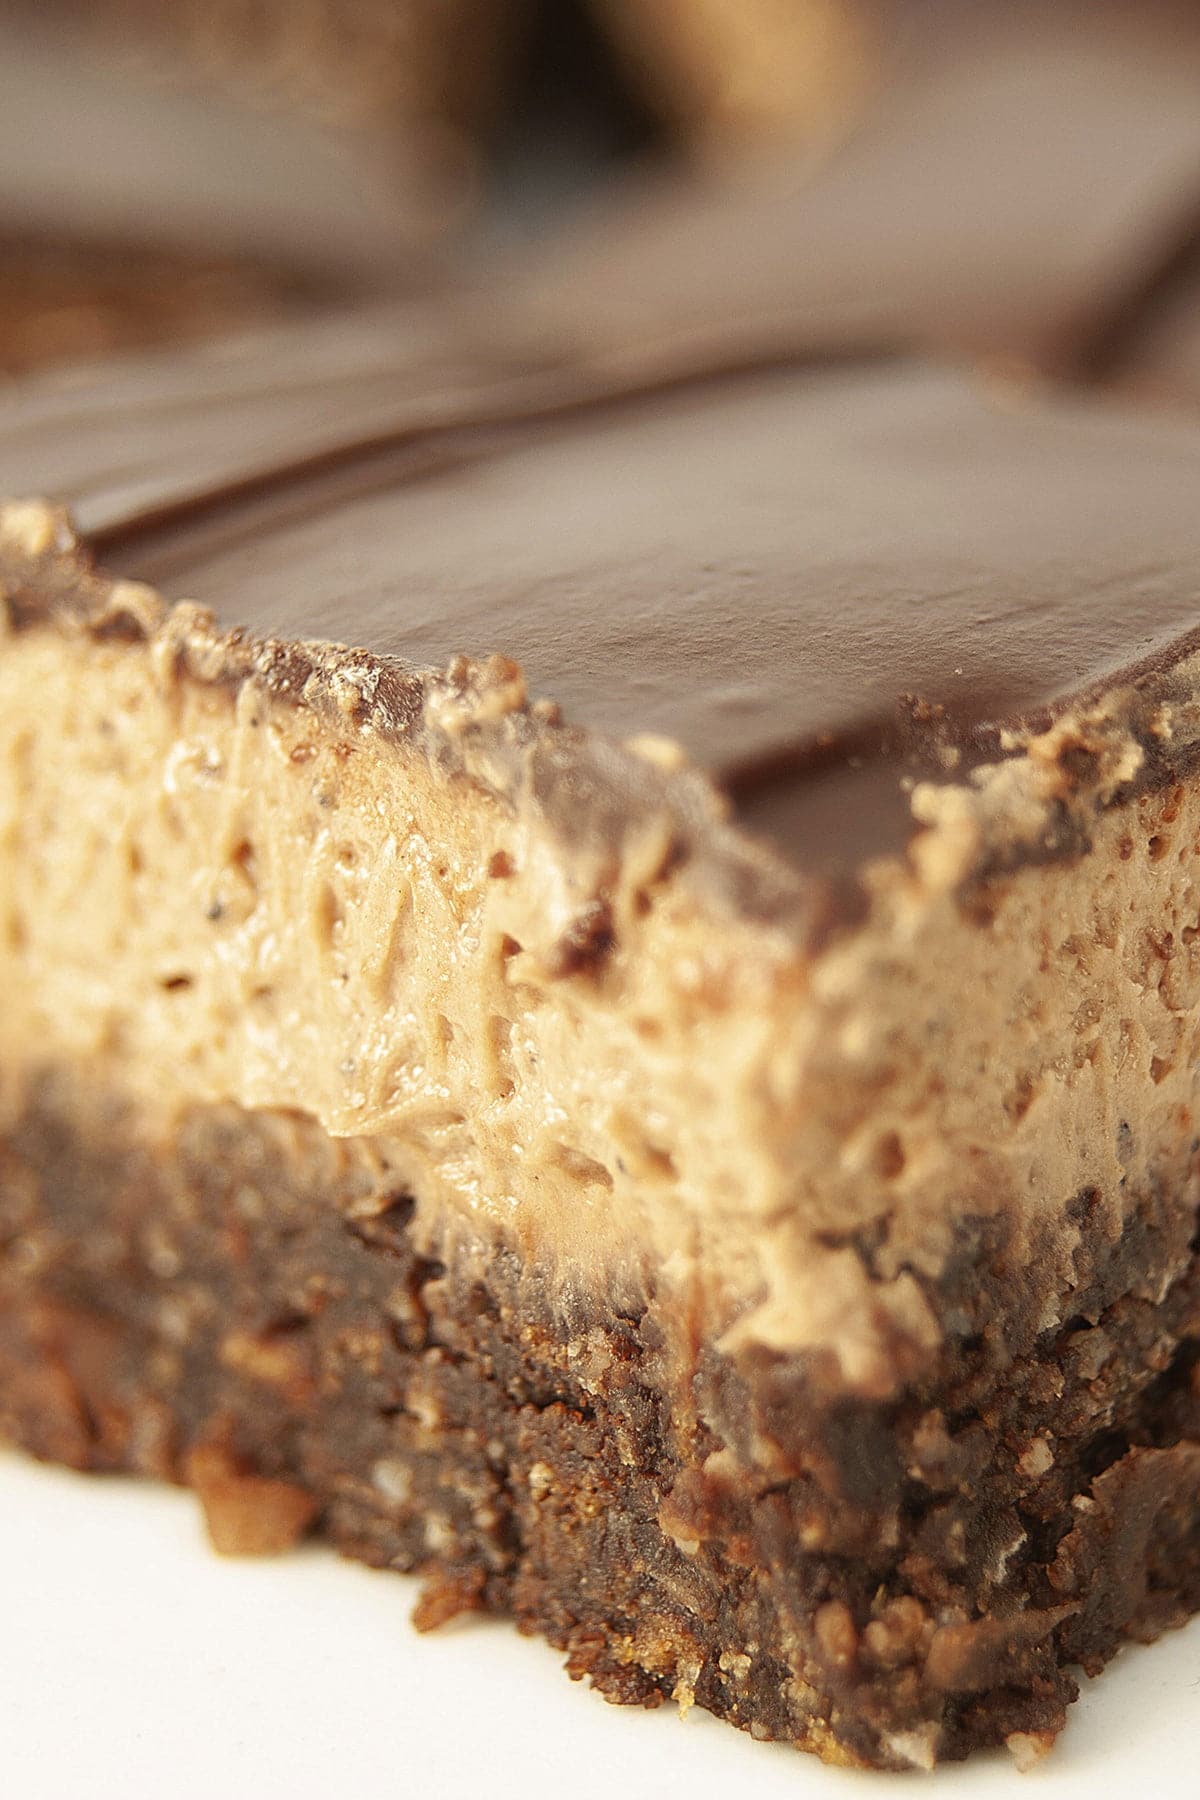 Close up view of a plate of 3 layered bars. The bottom layer looks like a brownie, the middle is a thick brown buttercream, and the top is a smooth chocolate ganache.